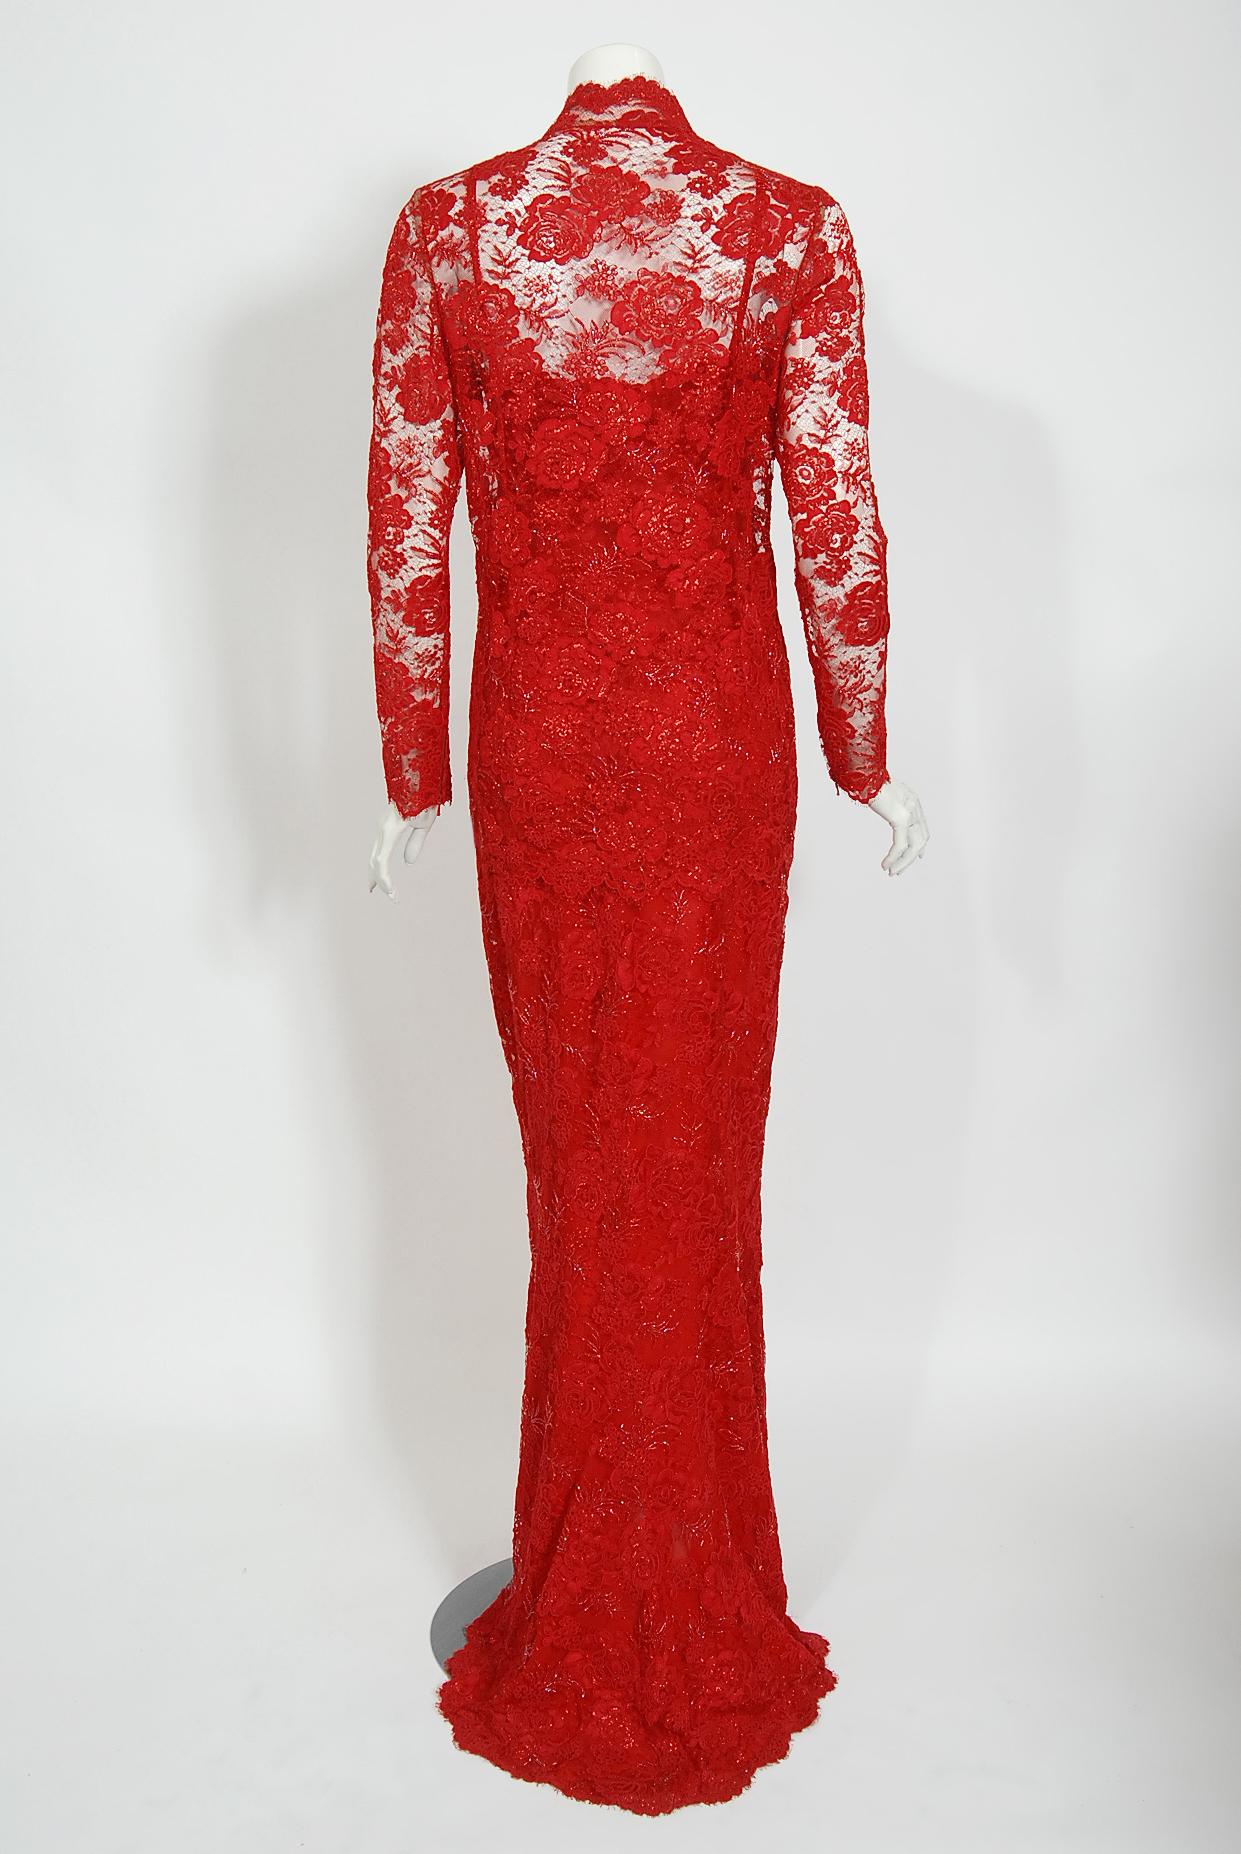 Vintage 1996 Ungaro Haute Couture Red Beaded Floral Lace Hourglass Gown & Jacket 9